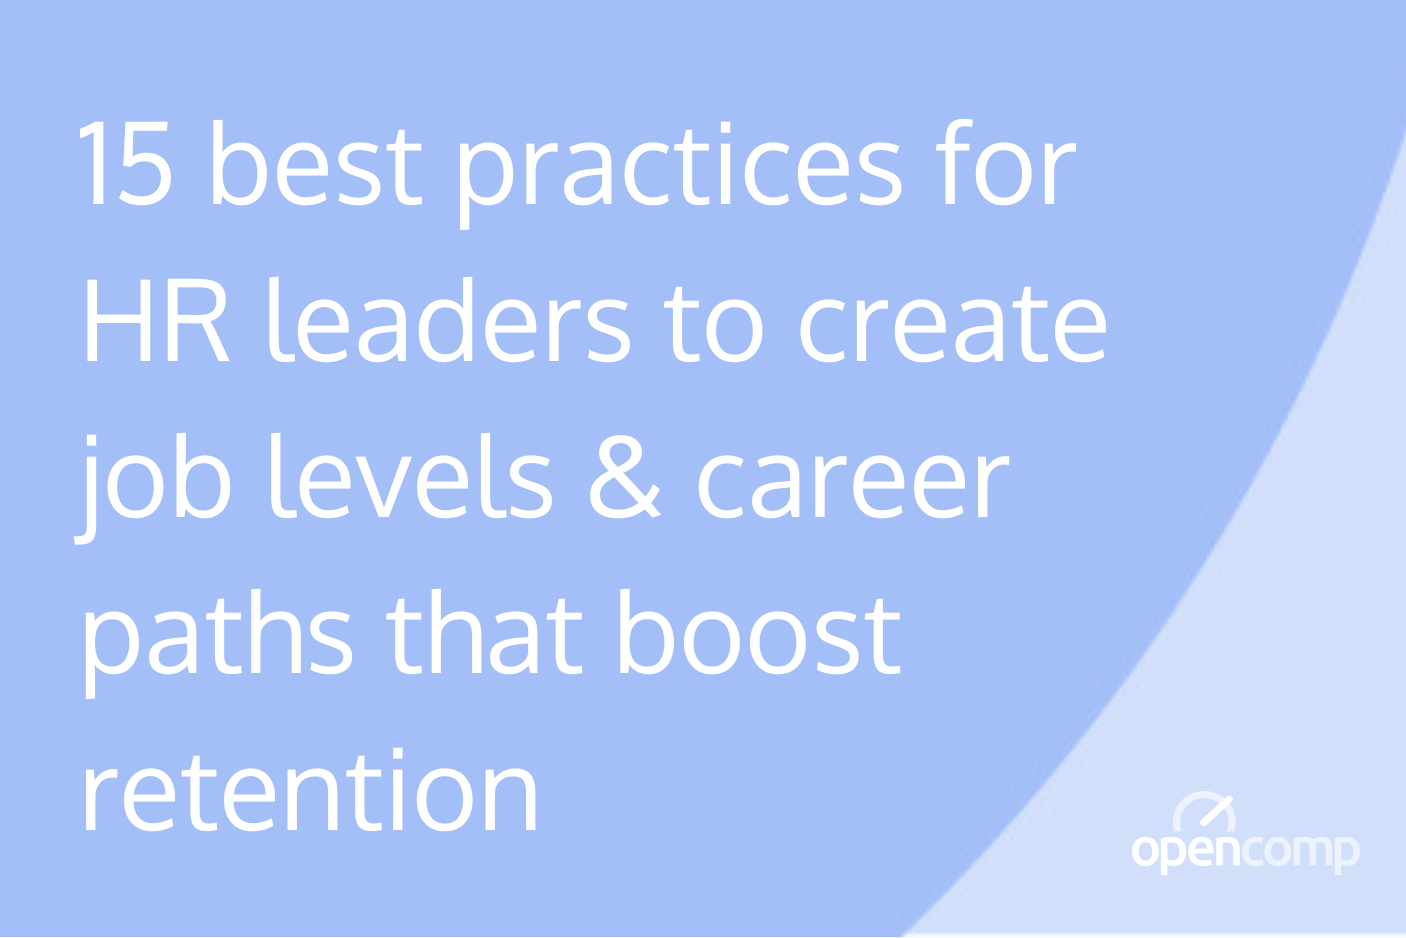 15 best practices for HR leaders to create job levels & career paths that boost retention